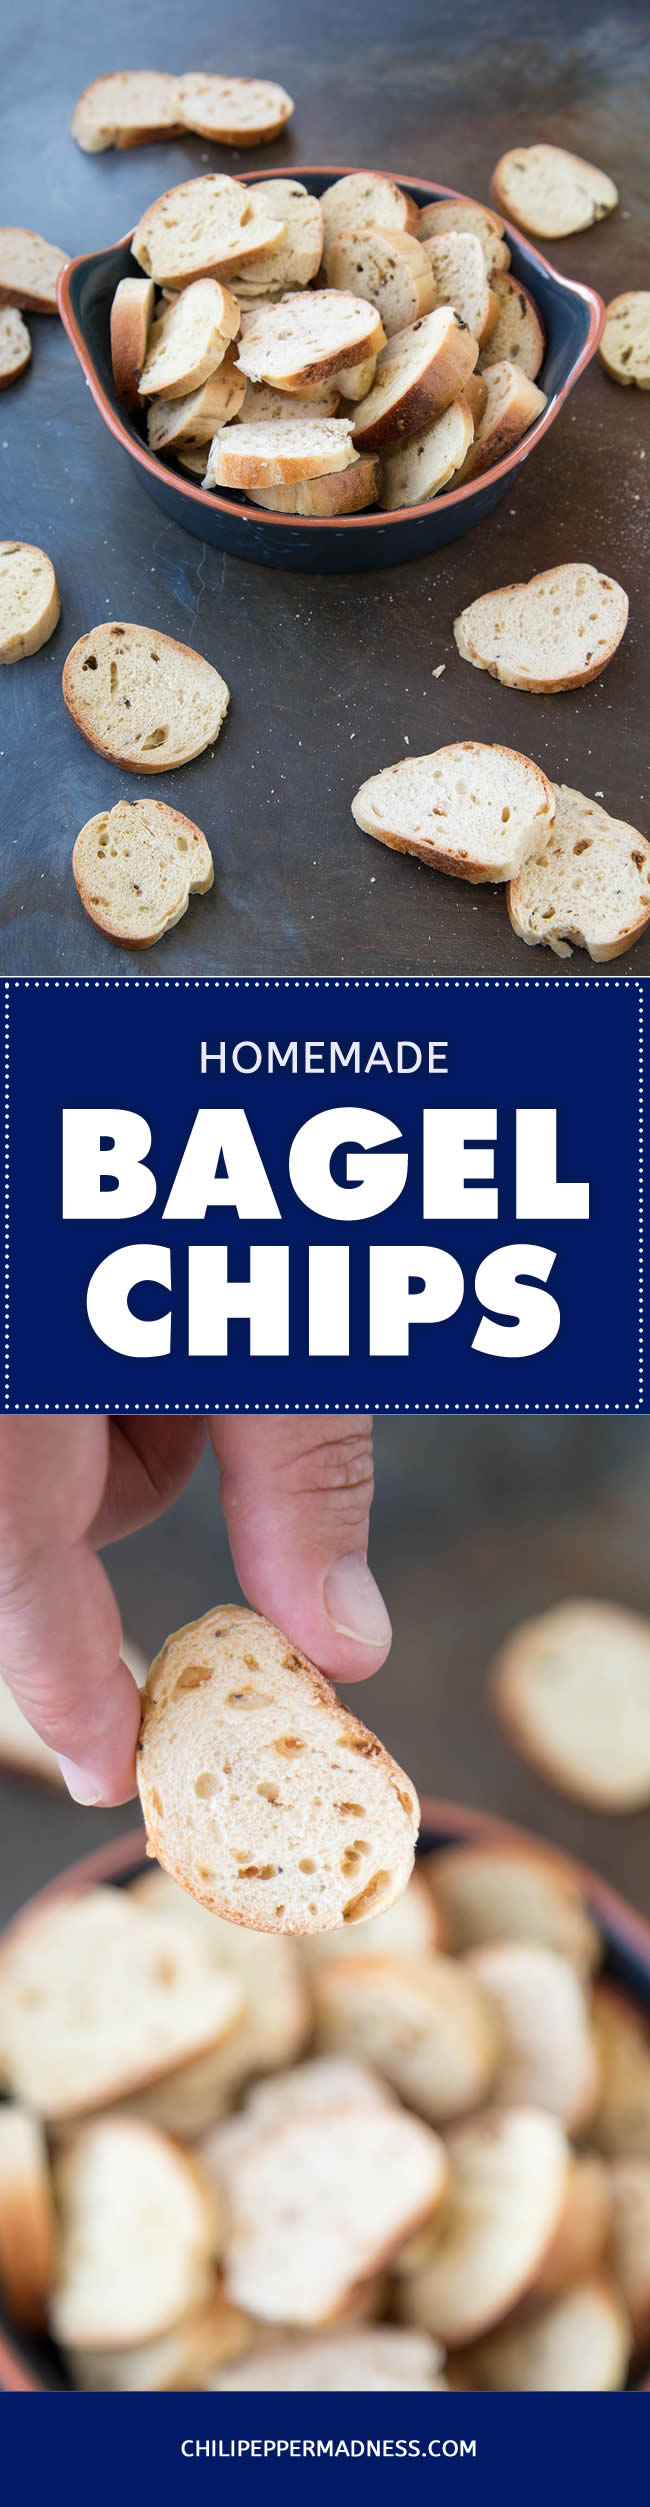 Homemade Bagel Chips - Recipe (Oven Baked or Dehydrator Method)